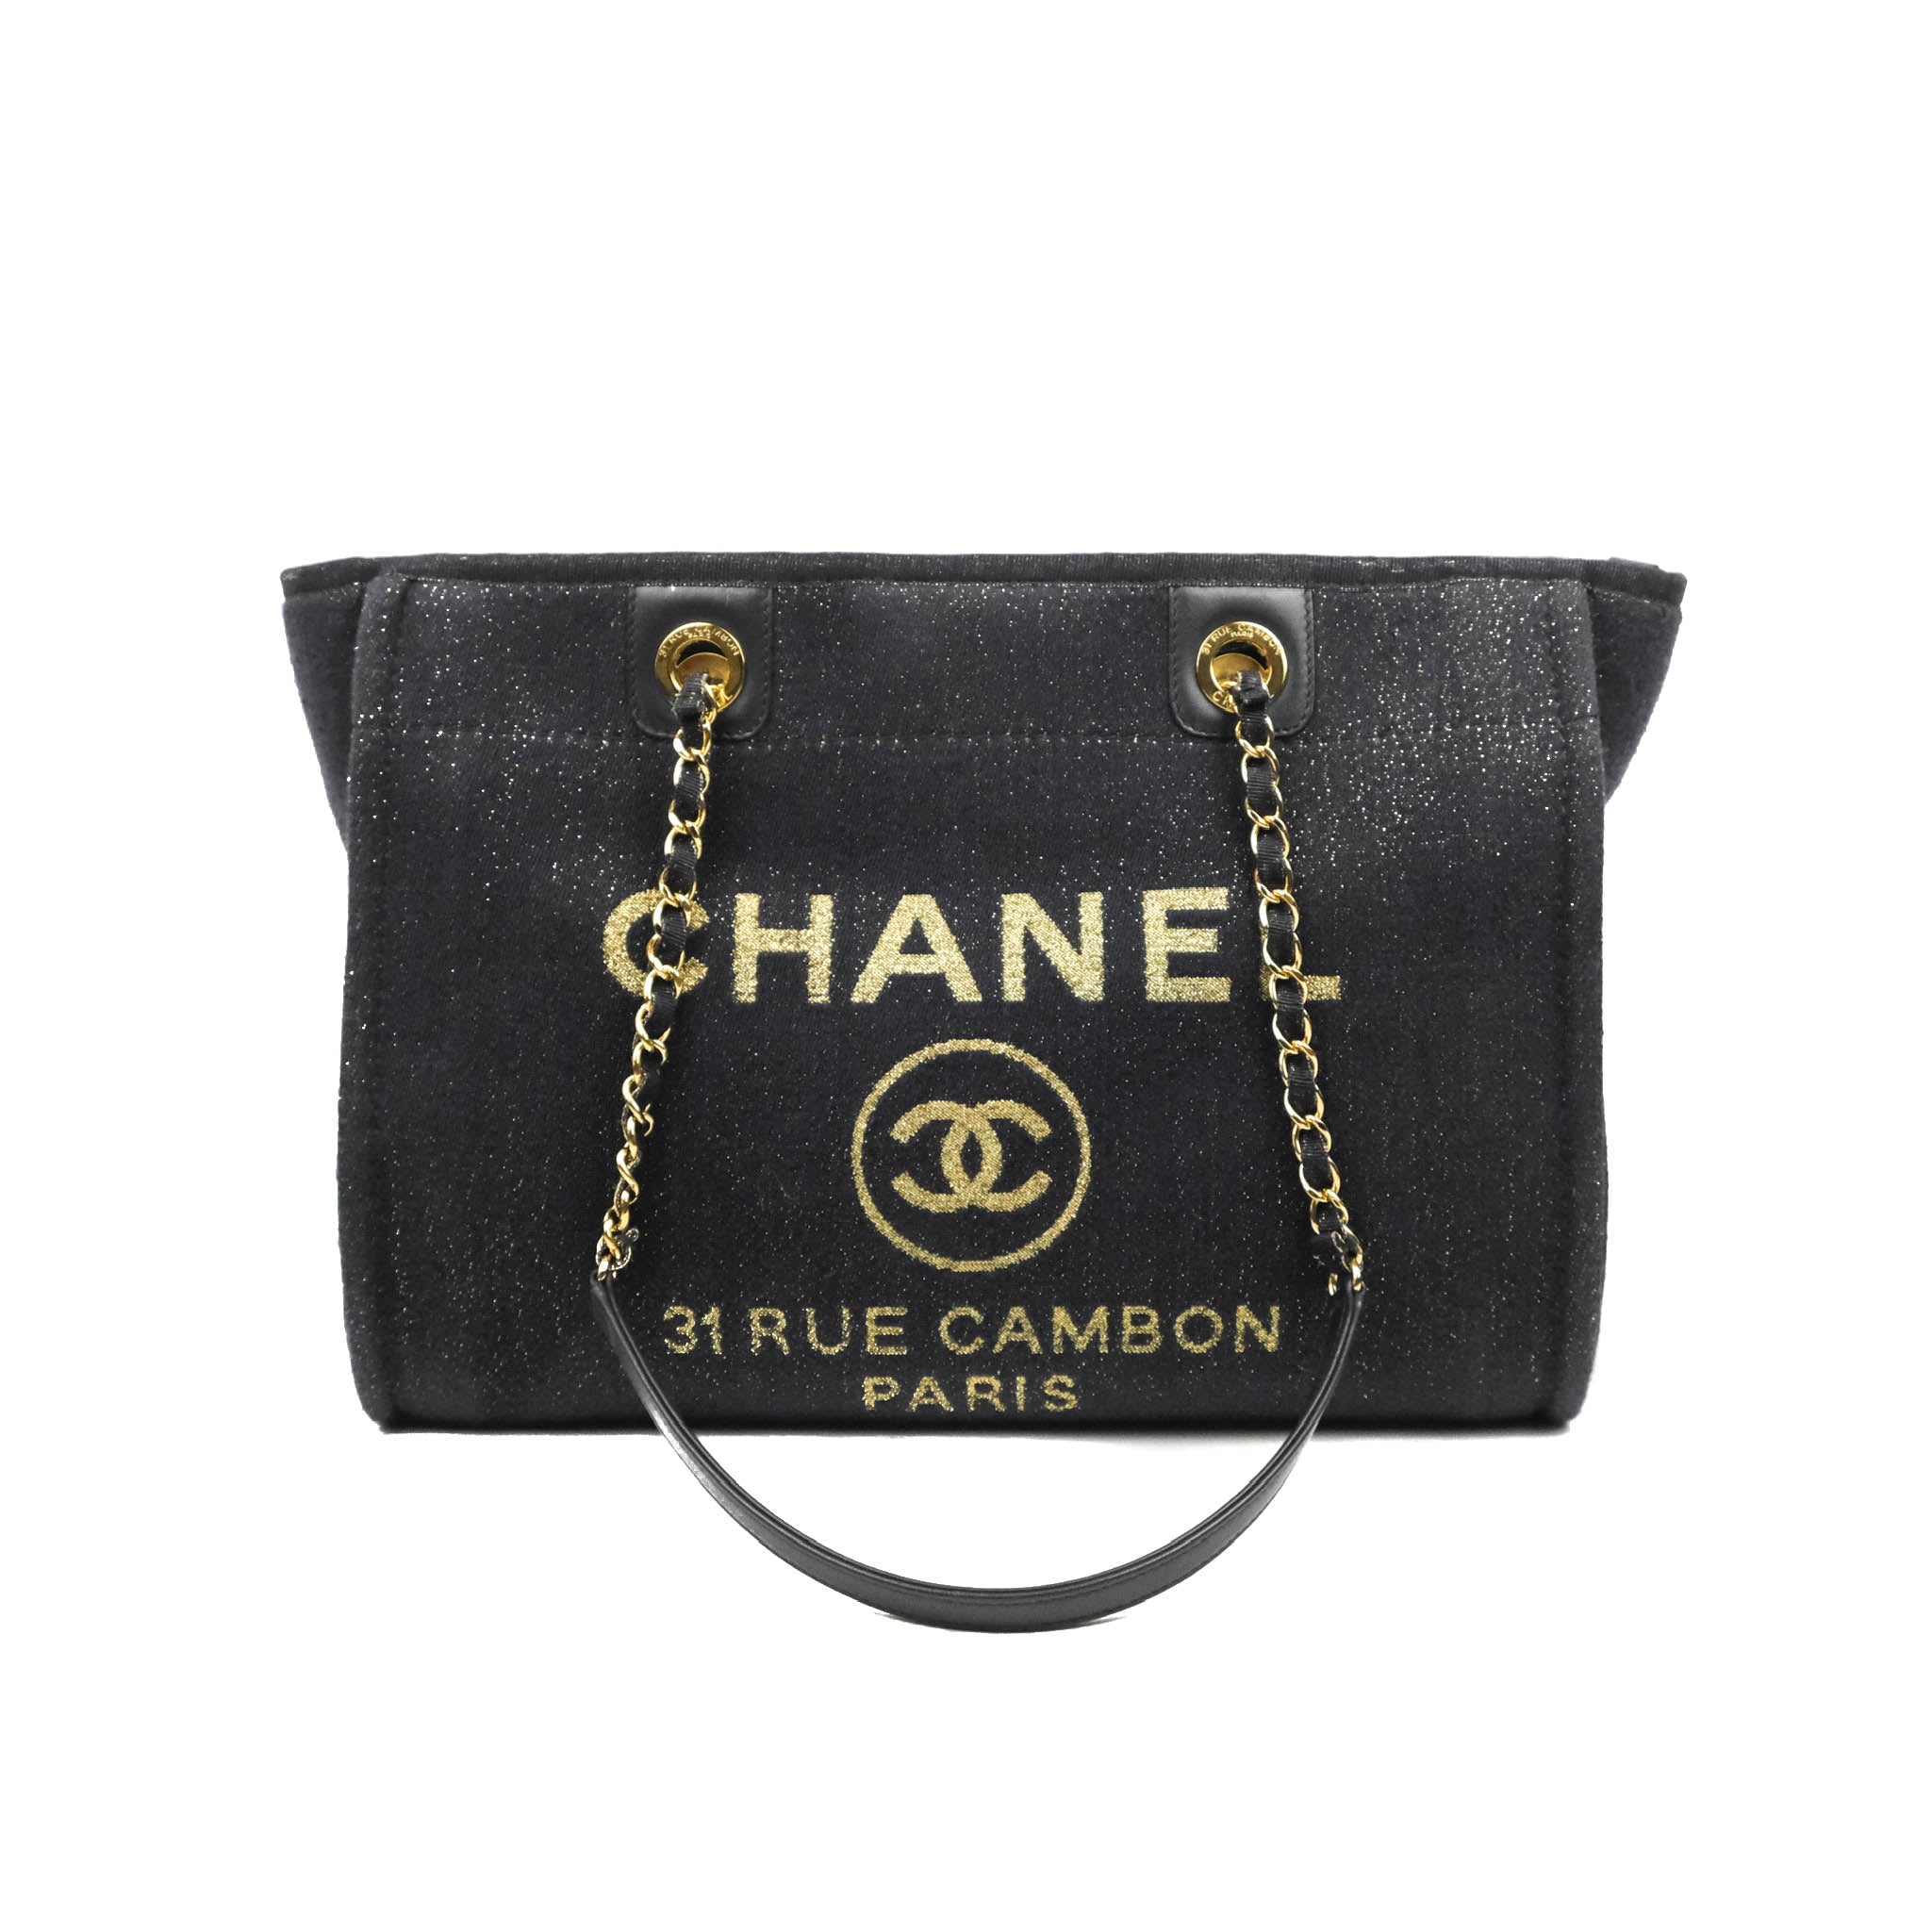 CHANEL Navy Blue Canvas Glitter Small Medium Deauville Tote Bag Light –  AYAINLOVE CURATED LUXURIES